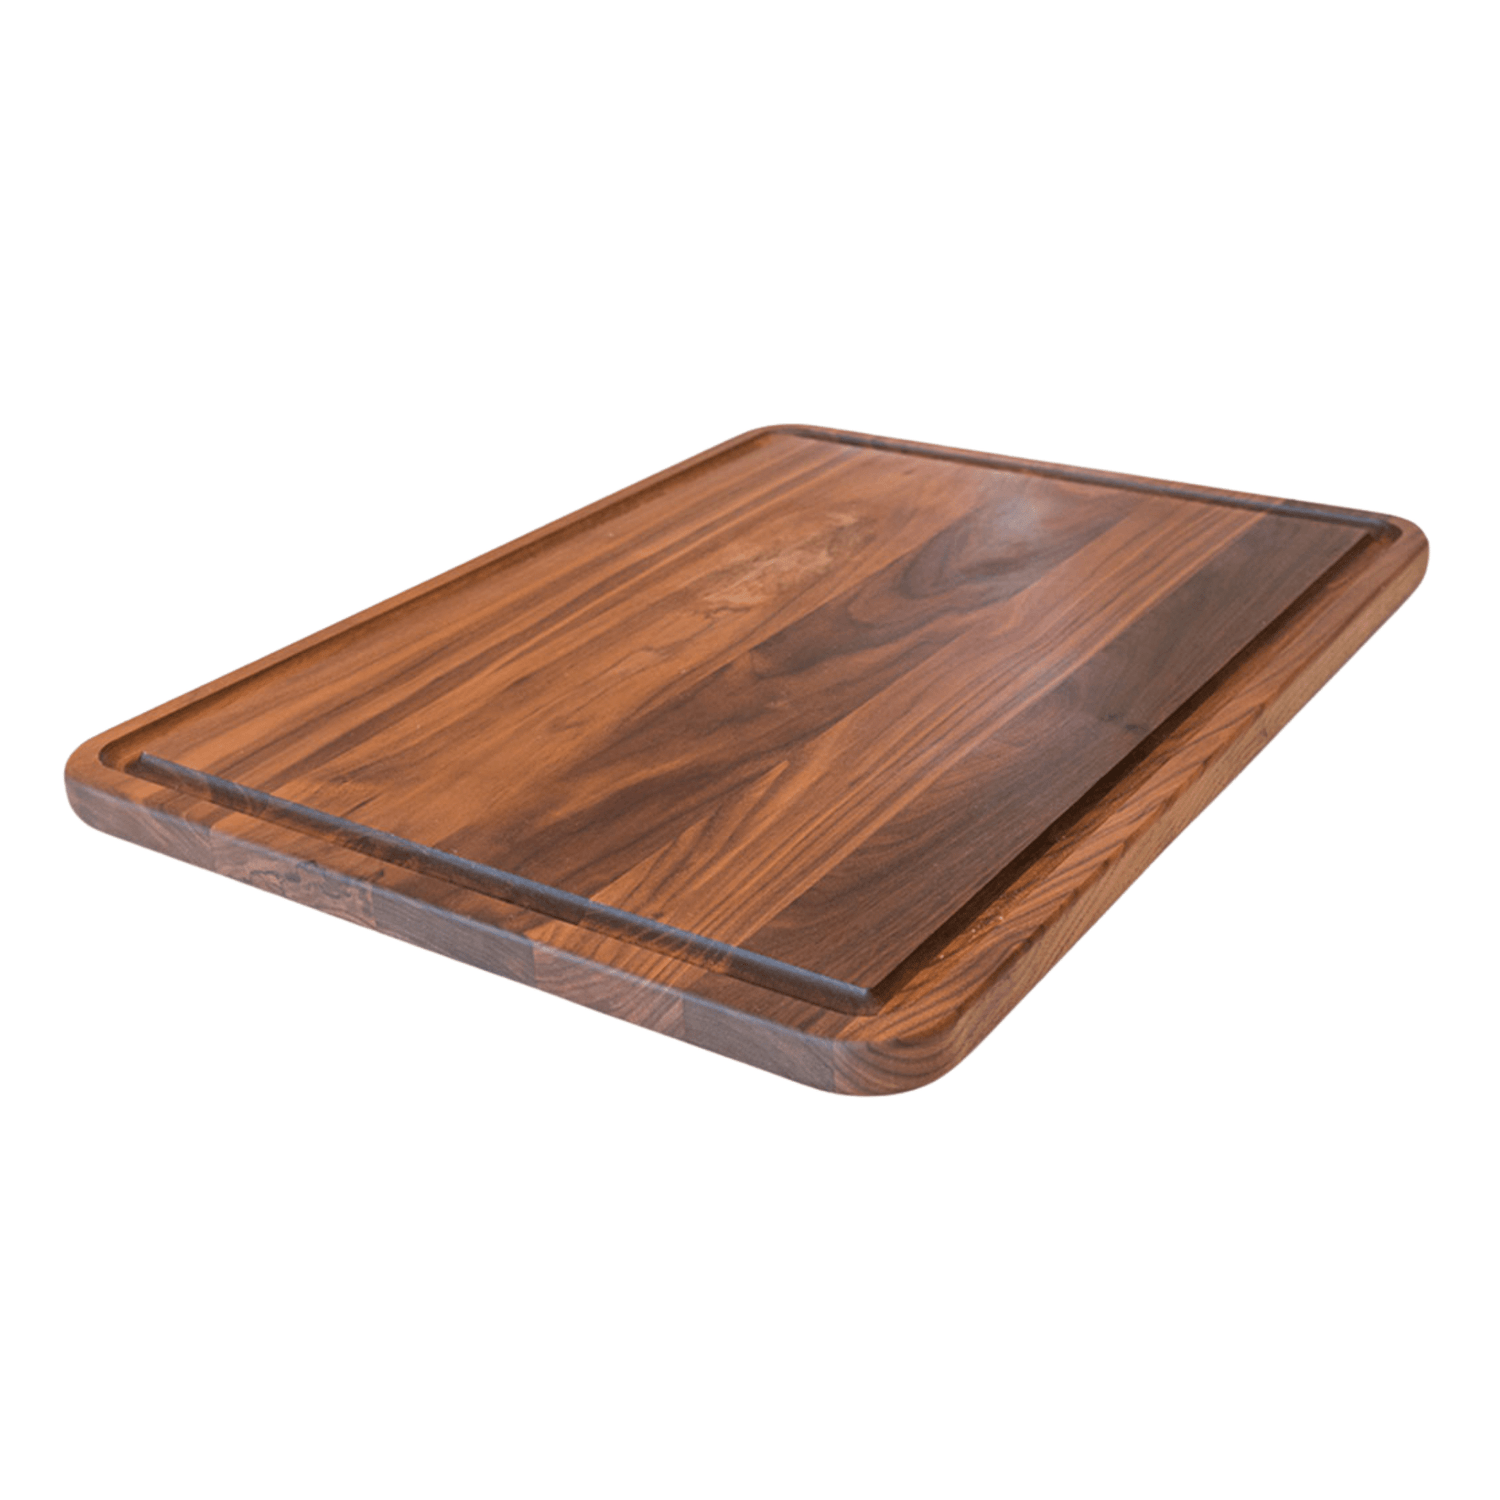 BOARDS AND TRAYS